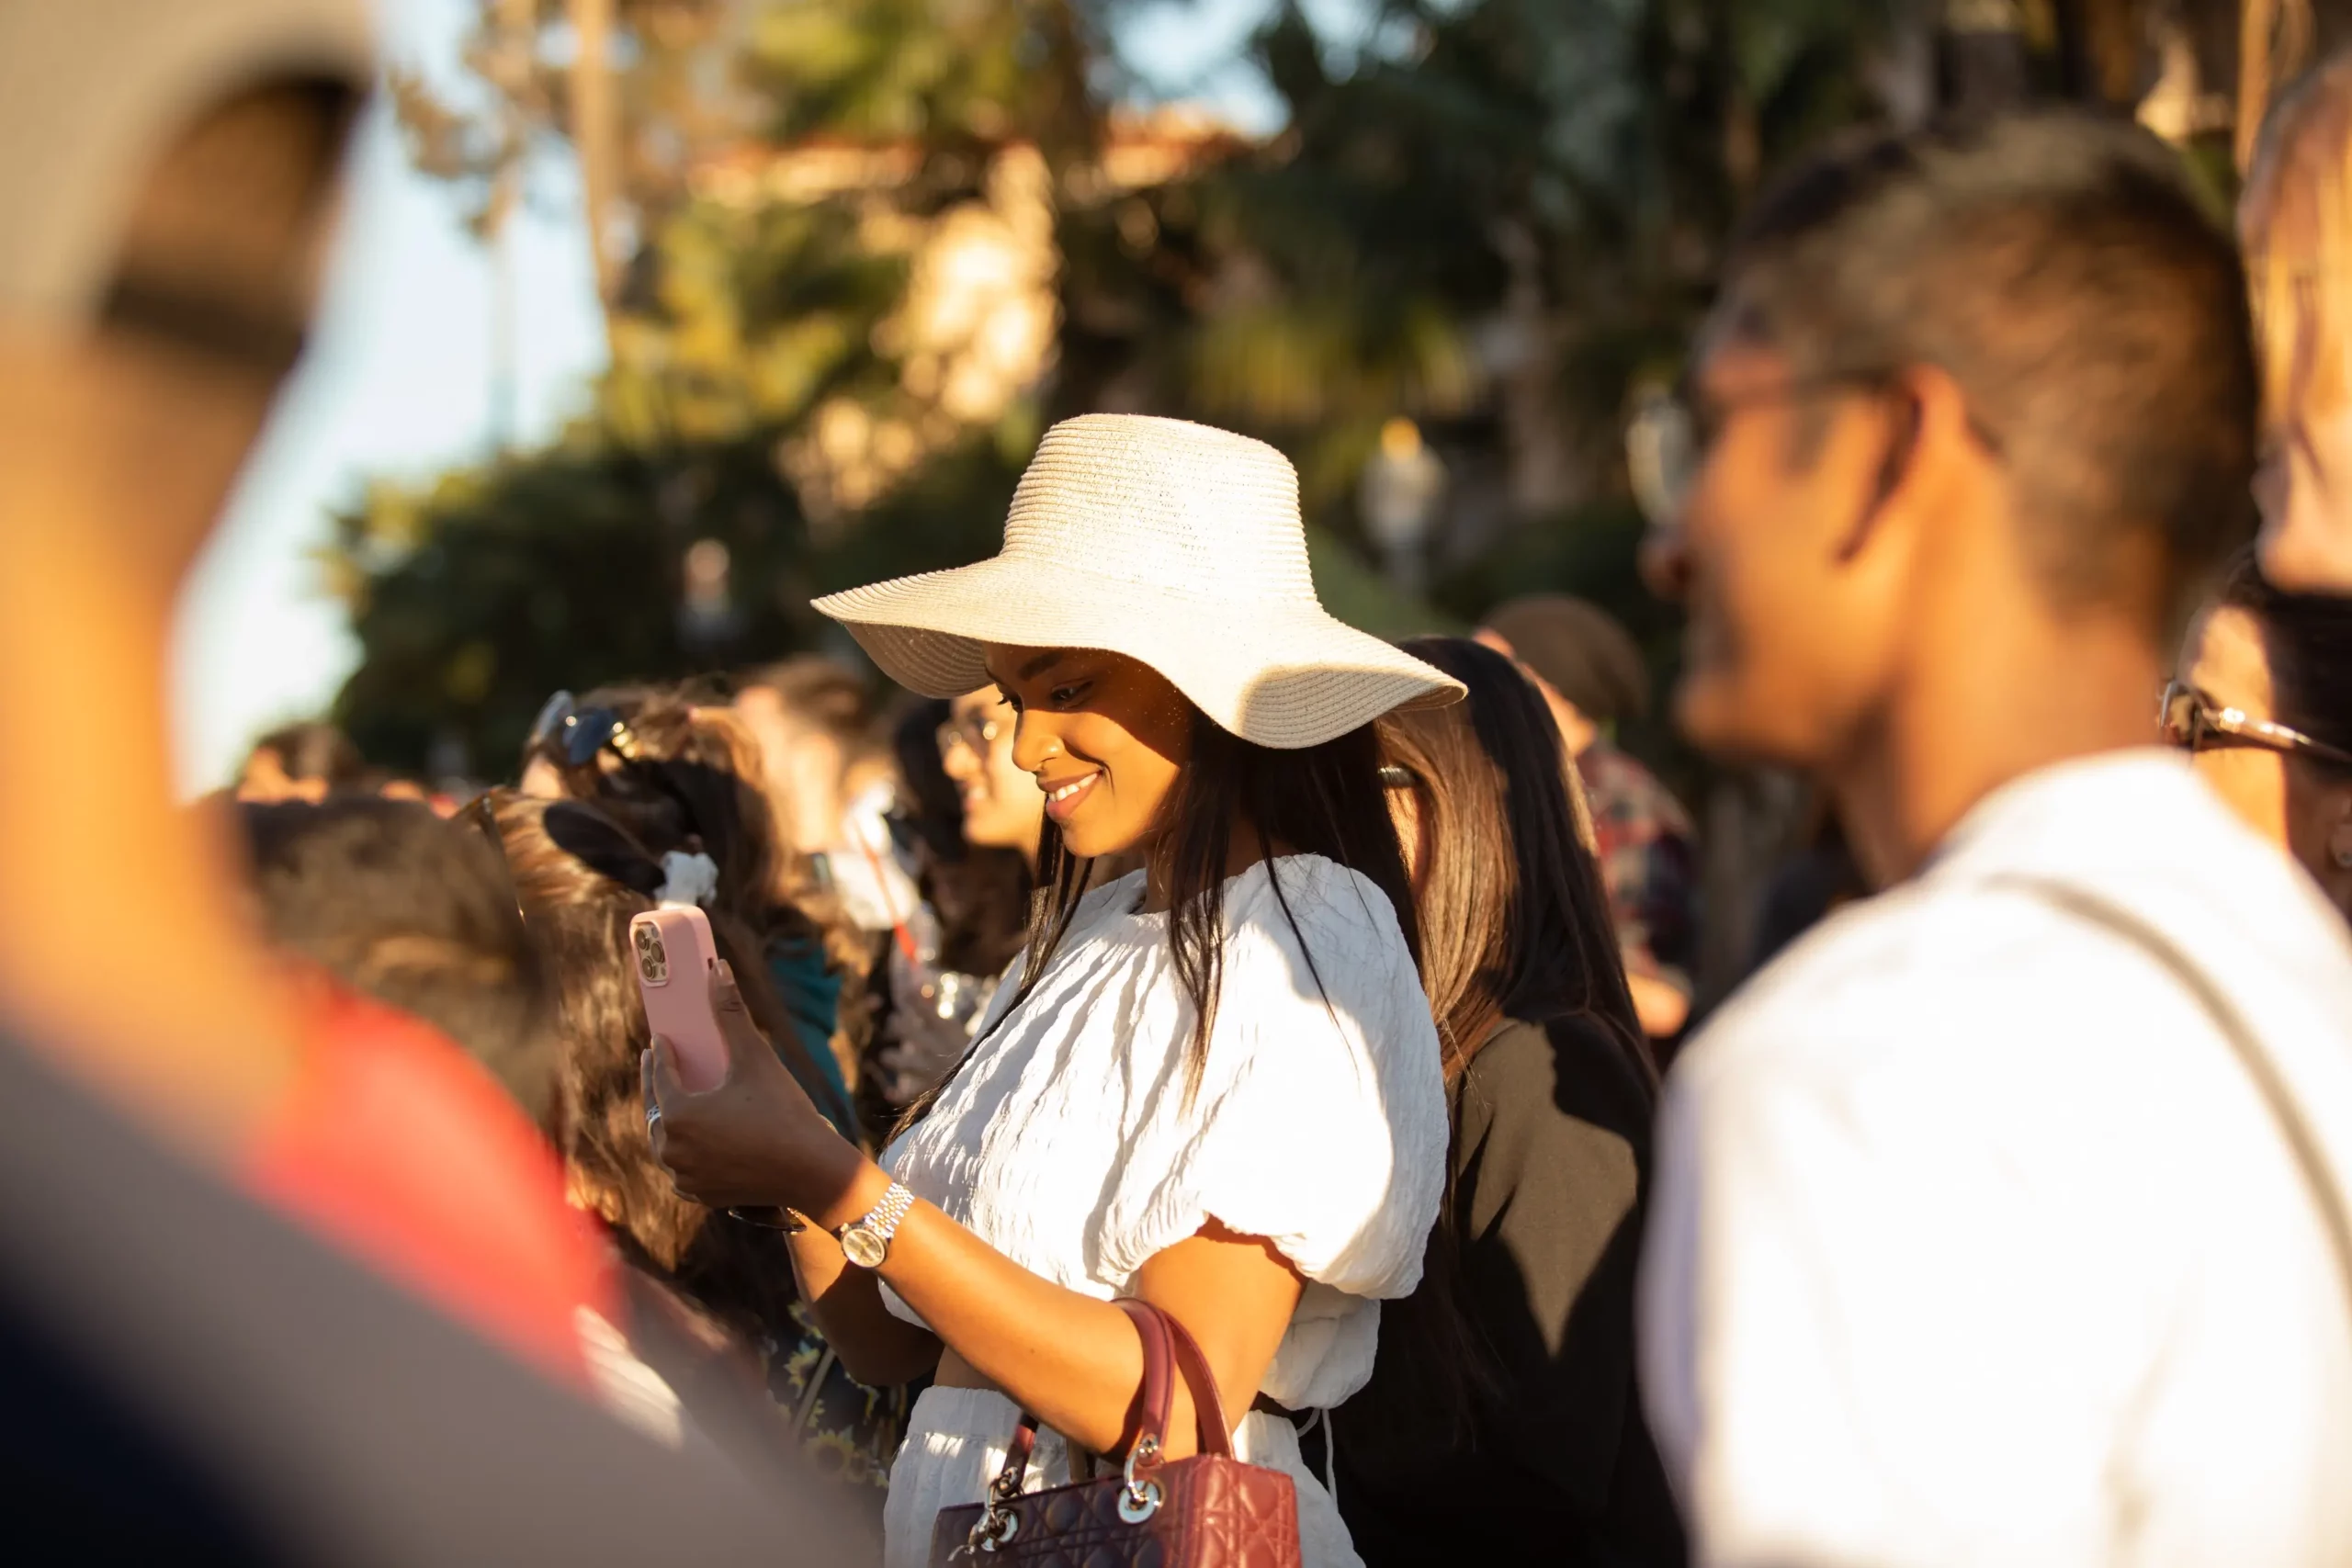 A crowd of diverse people with the focus on an adult with long brown hair wearing a white hat and dress smiling down at their cell phone.